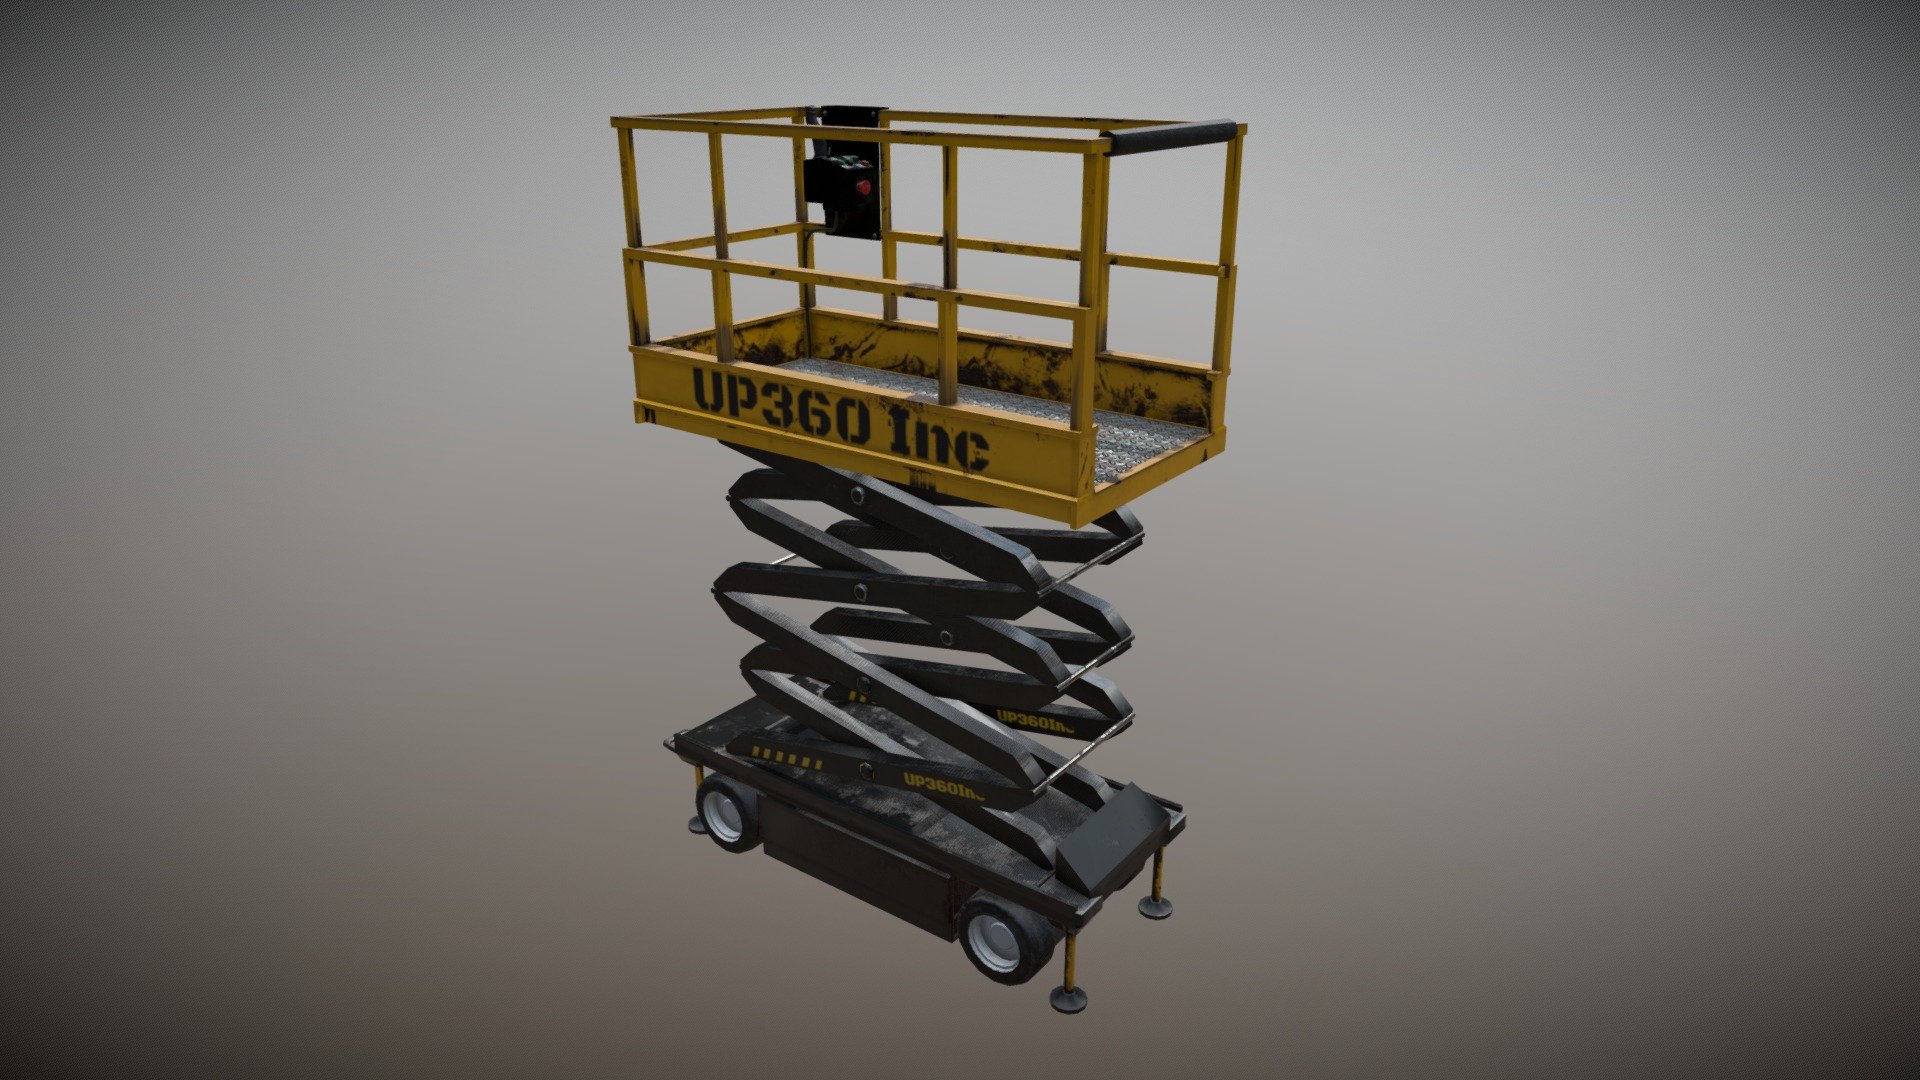 Might come back to this one at a later date but for now, it makes a great low poly game prop! - UP360 Inc - Low Poly Scissor Lift - 3D model by Chronic Creativity (@chroniccreativity) 3d model